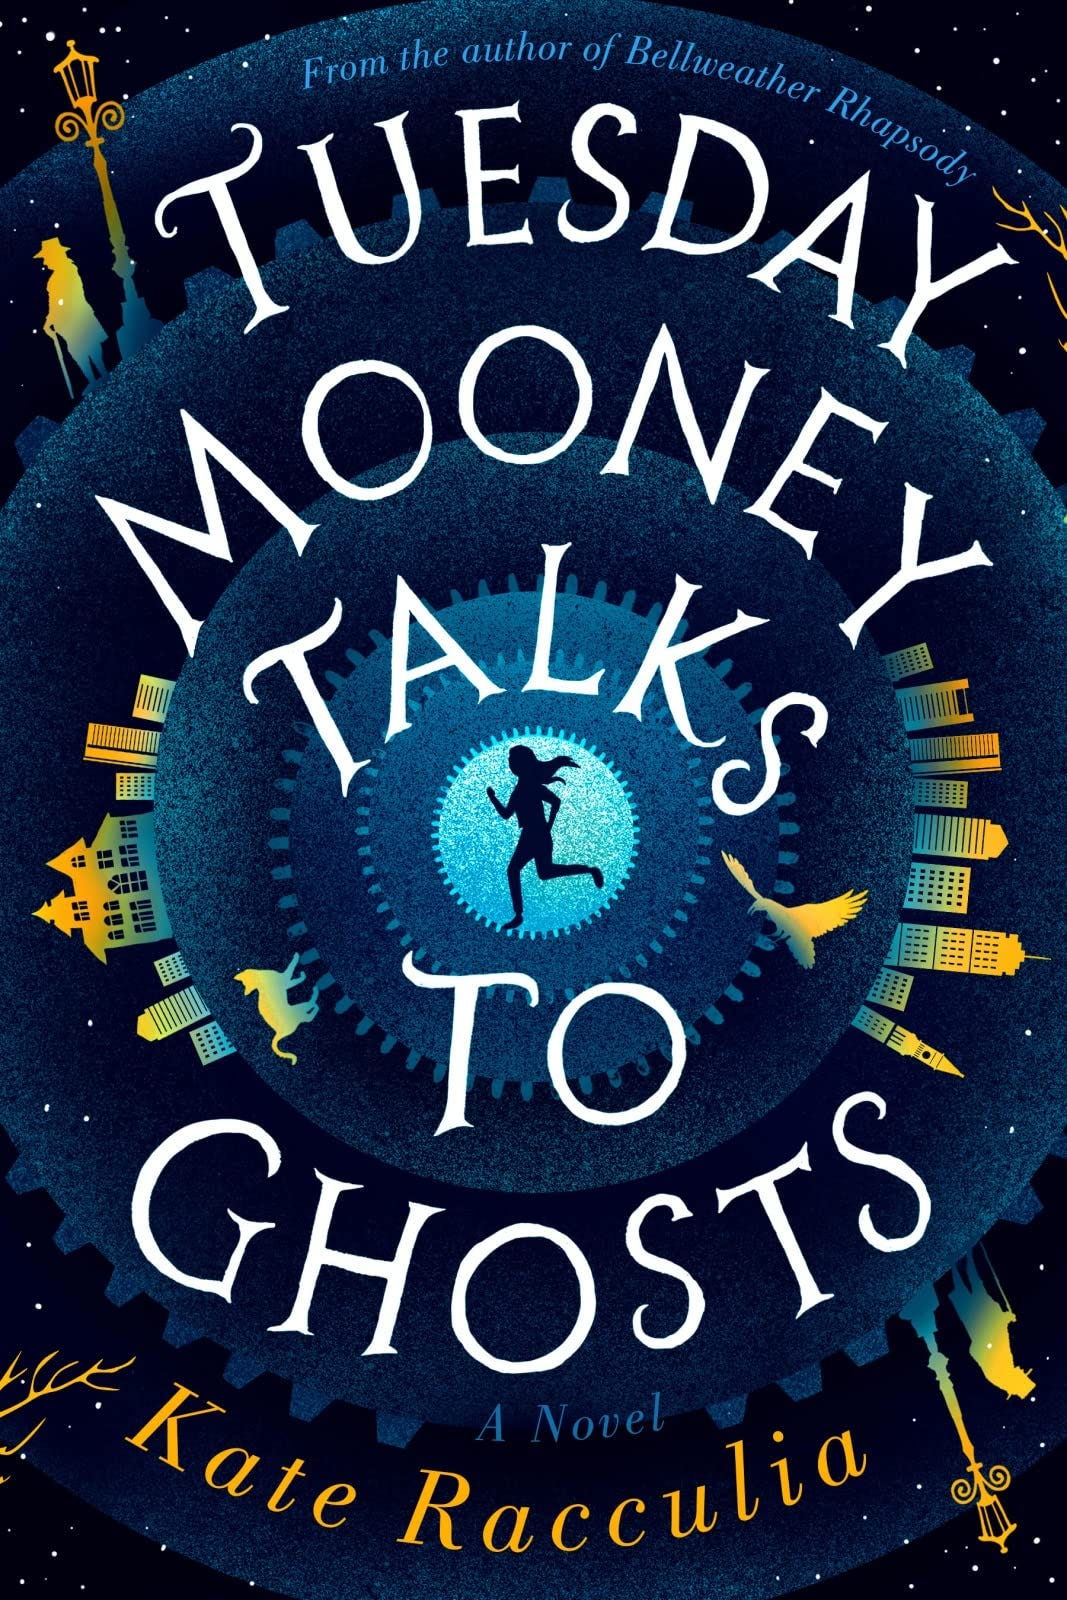 Book cover for Tuesday Mooney Talks to Ghosts